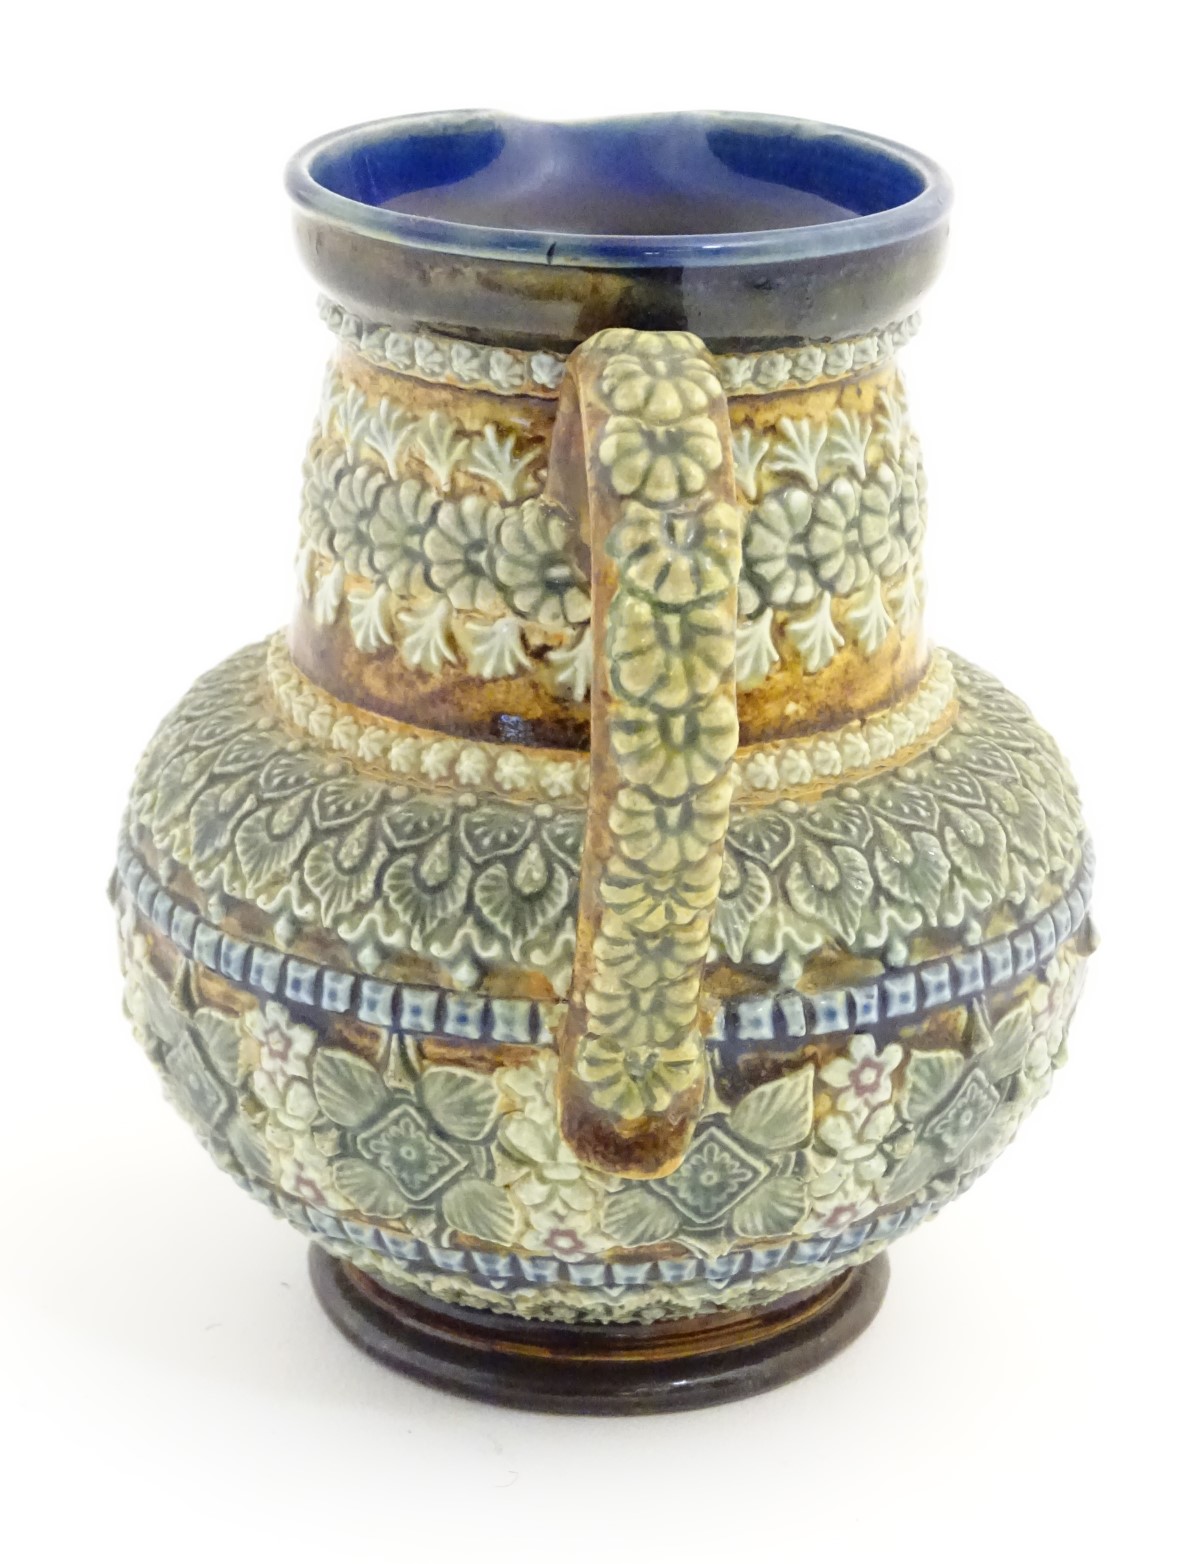 A 19thC Doulton Lambeth jug with a banded floral design in relief by Clara Baker. Doulton Lambeth - Image 6 of 7